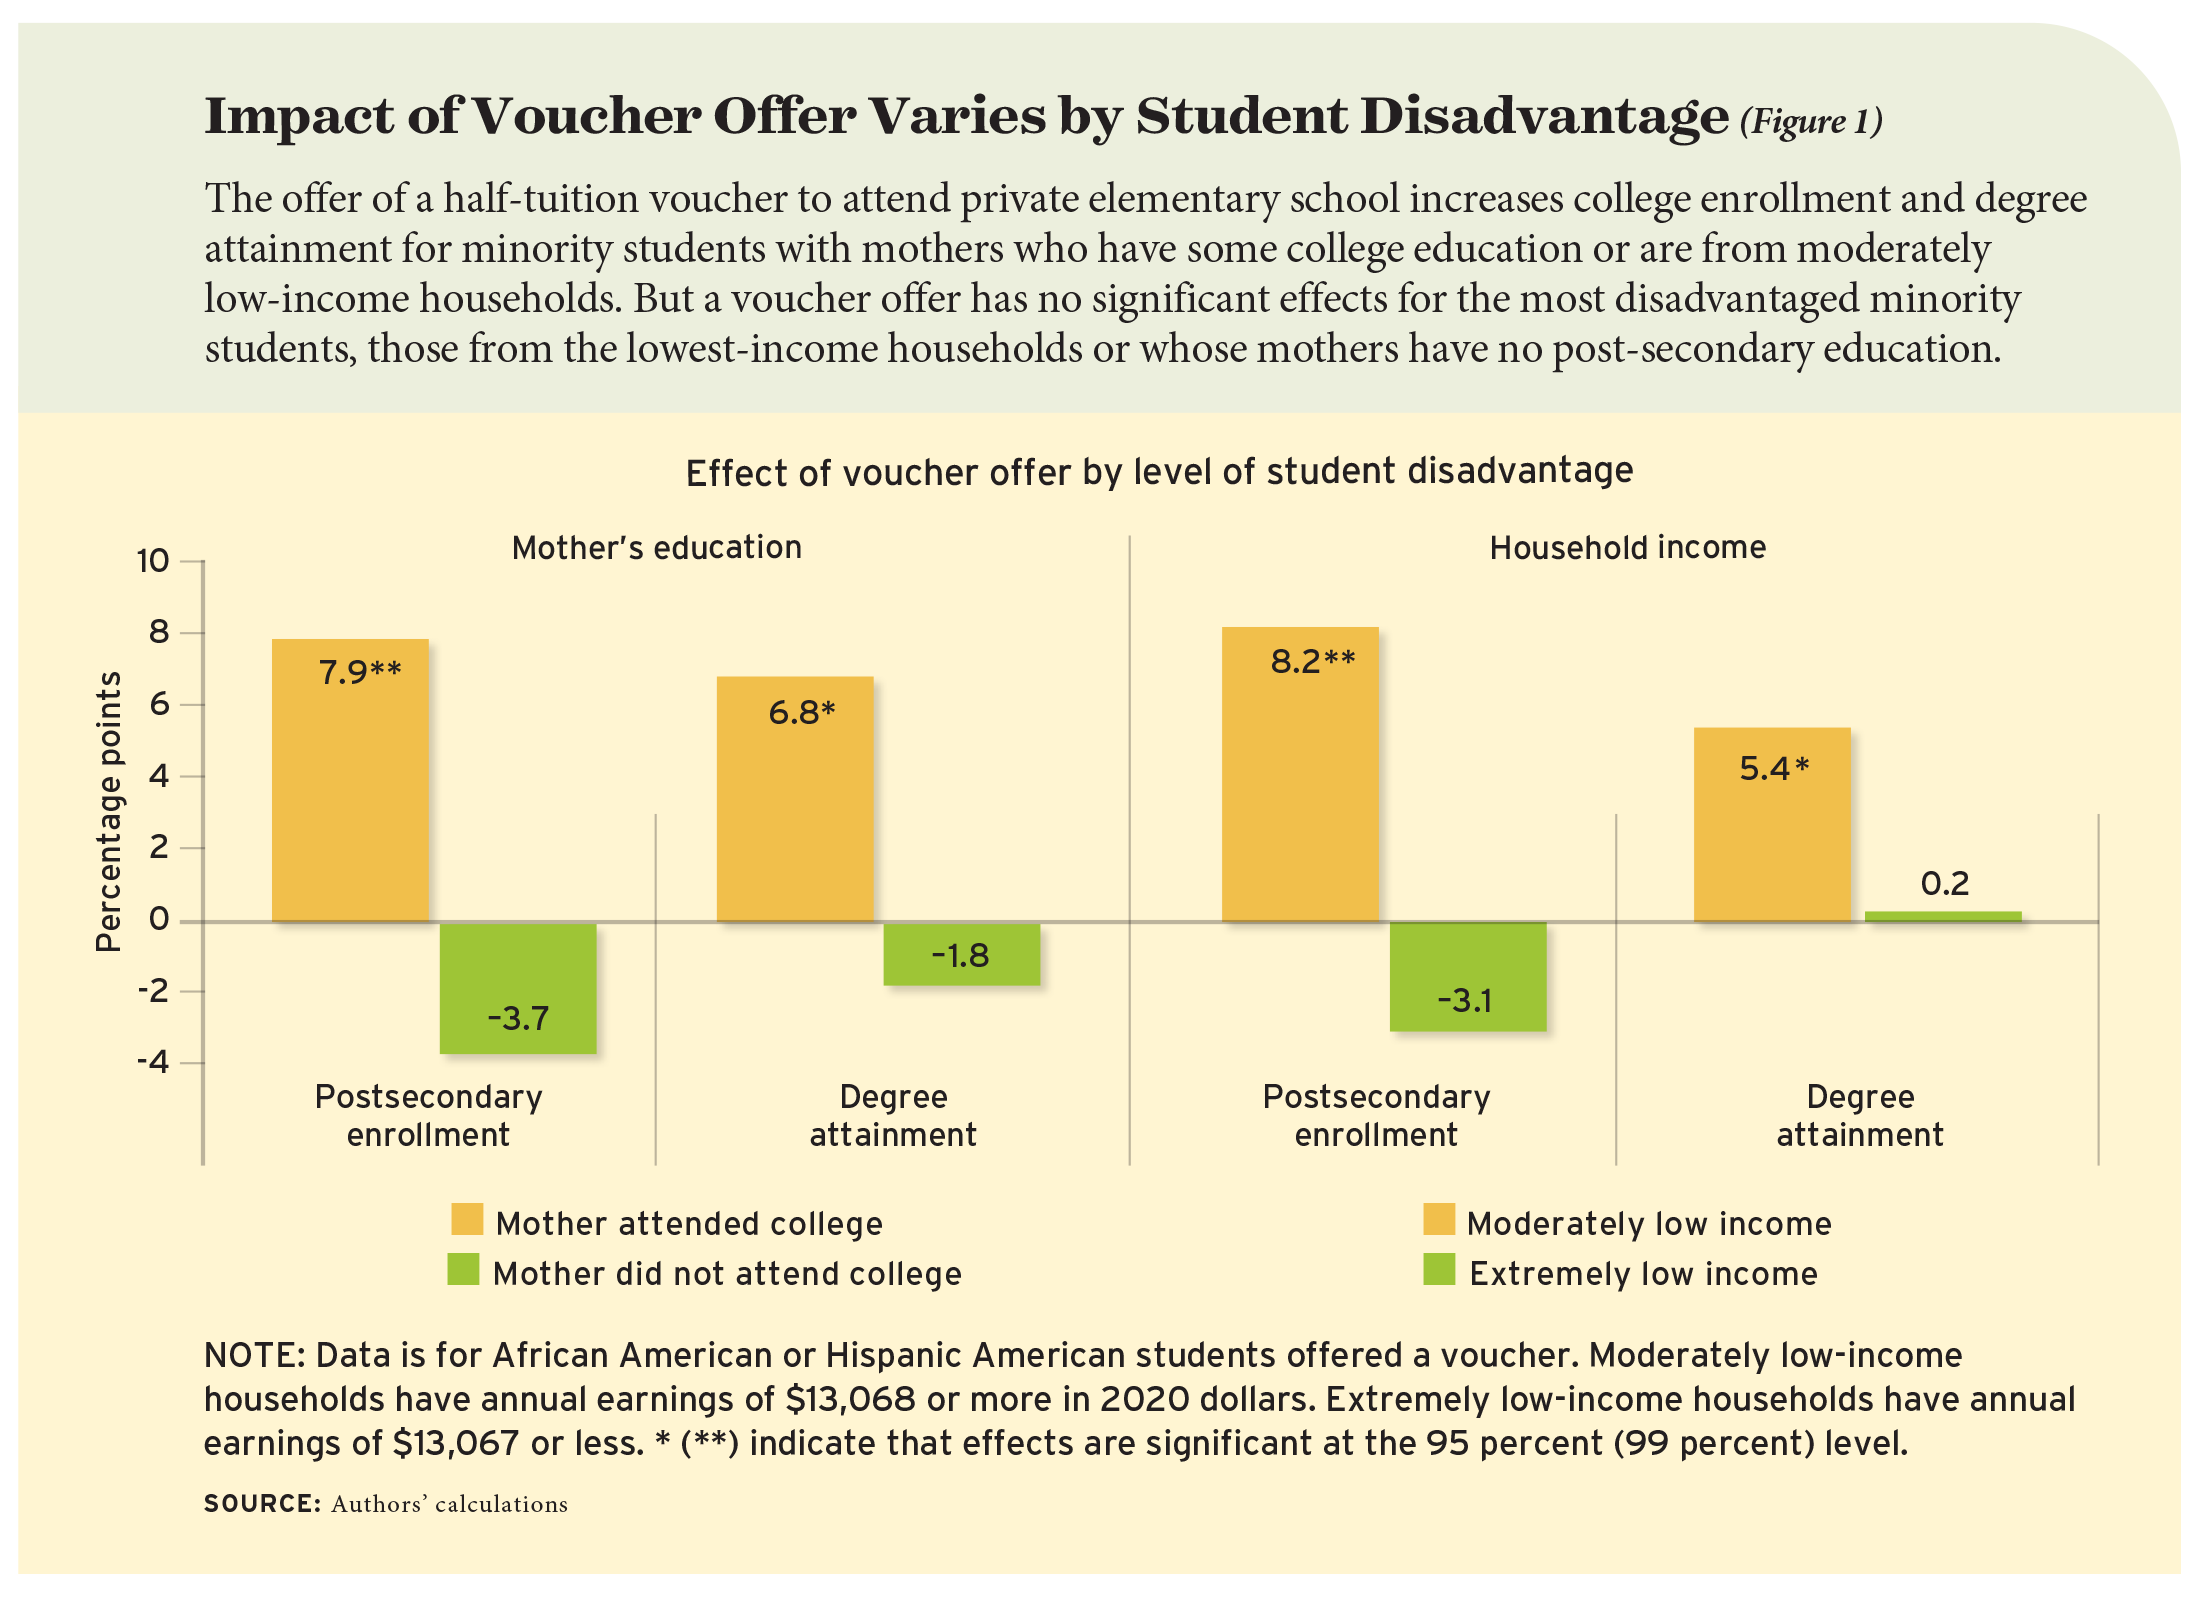 Figure 1: Impact of Voucher Offer Varies by Student Disadvantage